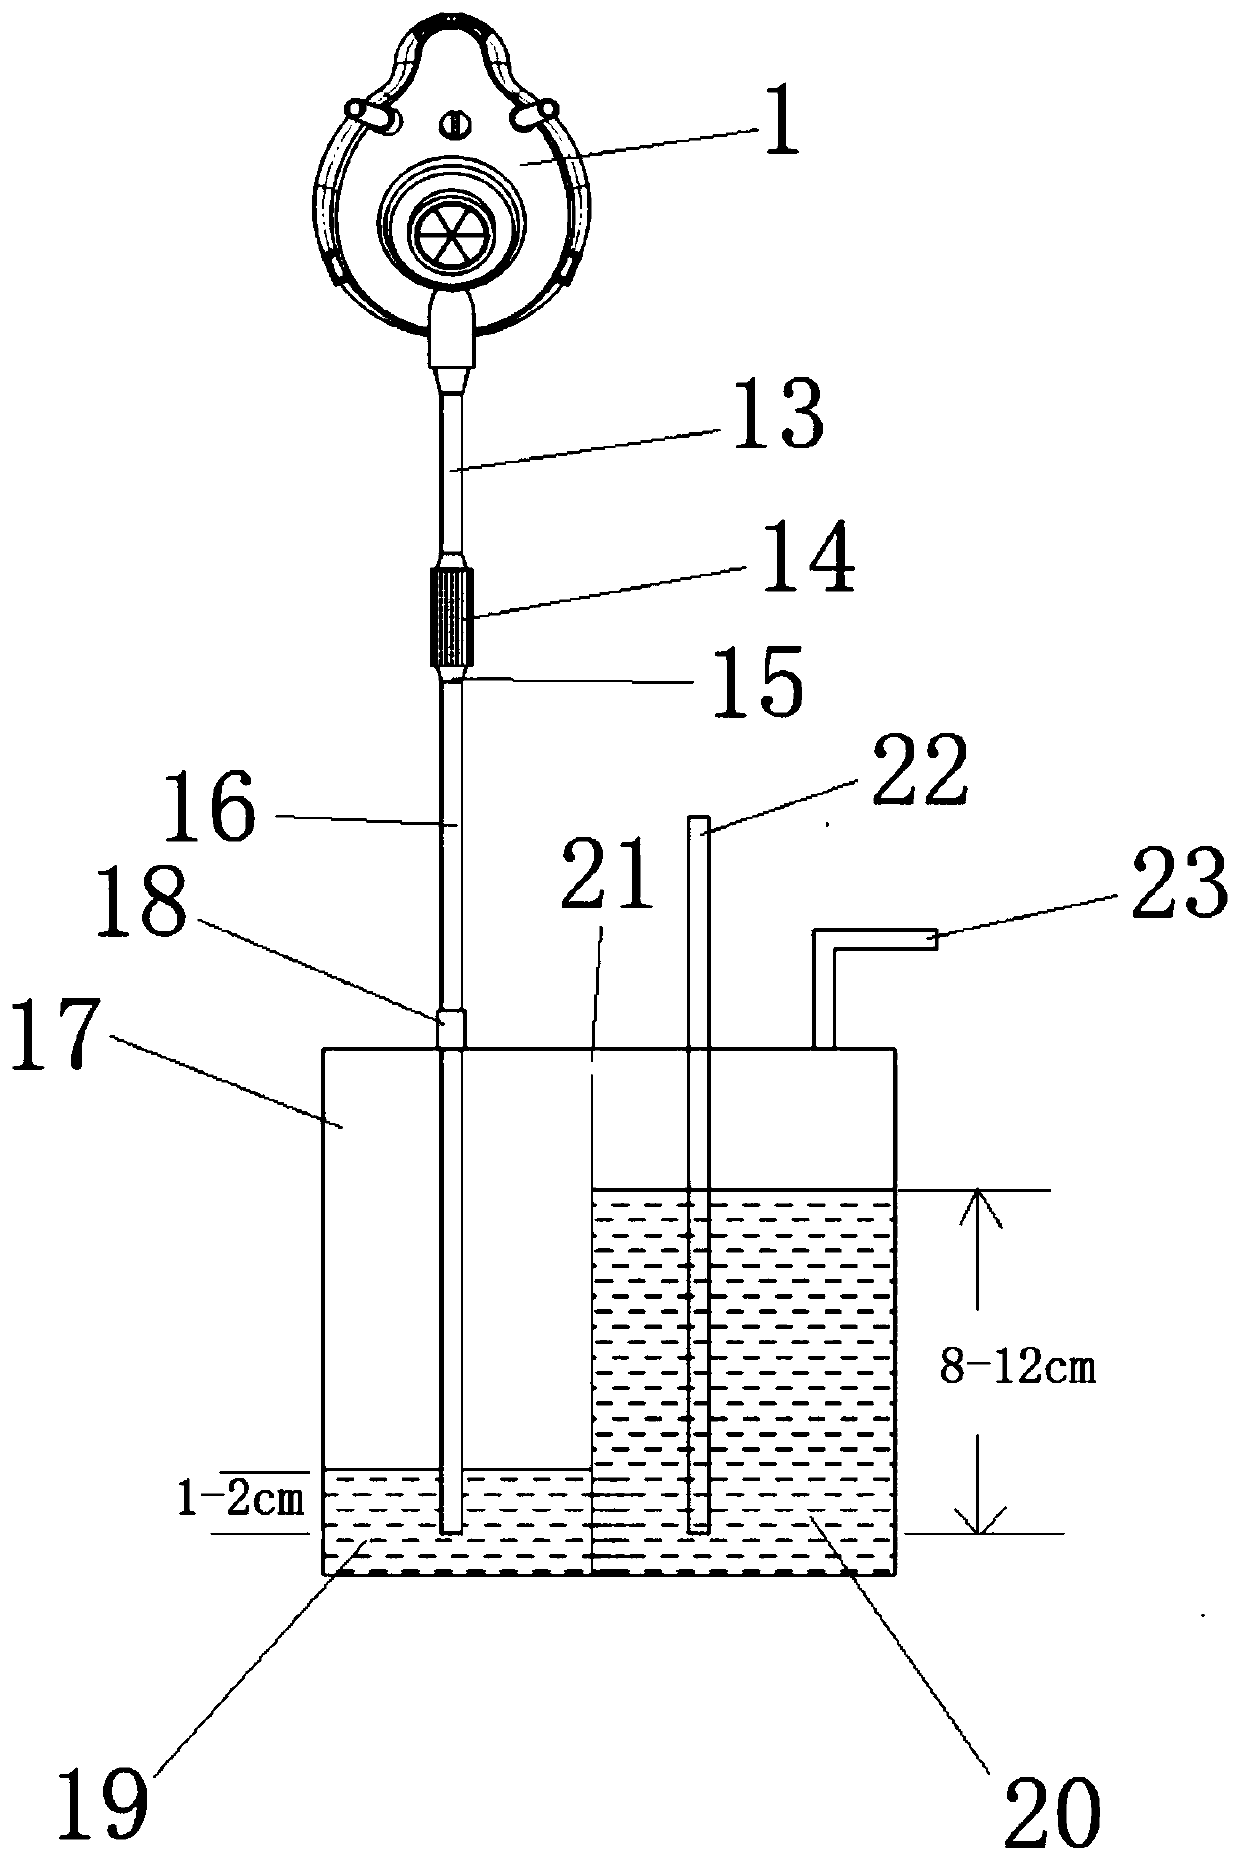 Negative pressure mask for endoscopic examination and adsorption filtering device